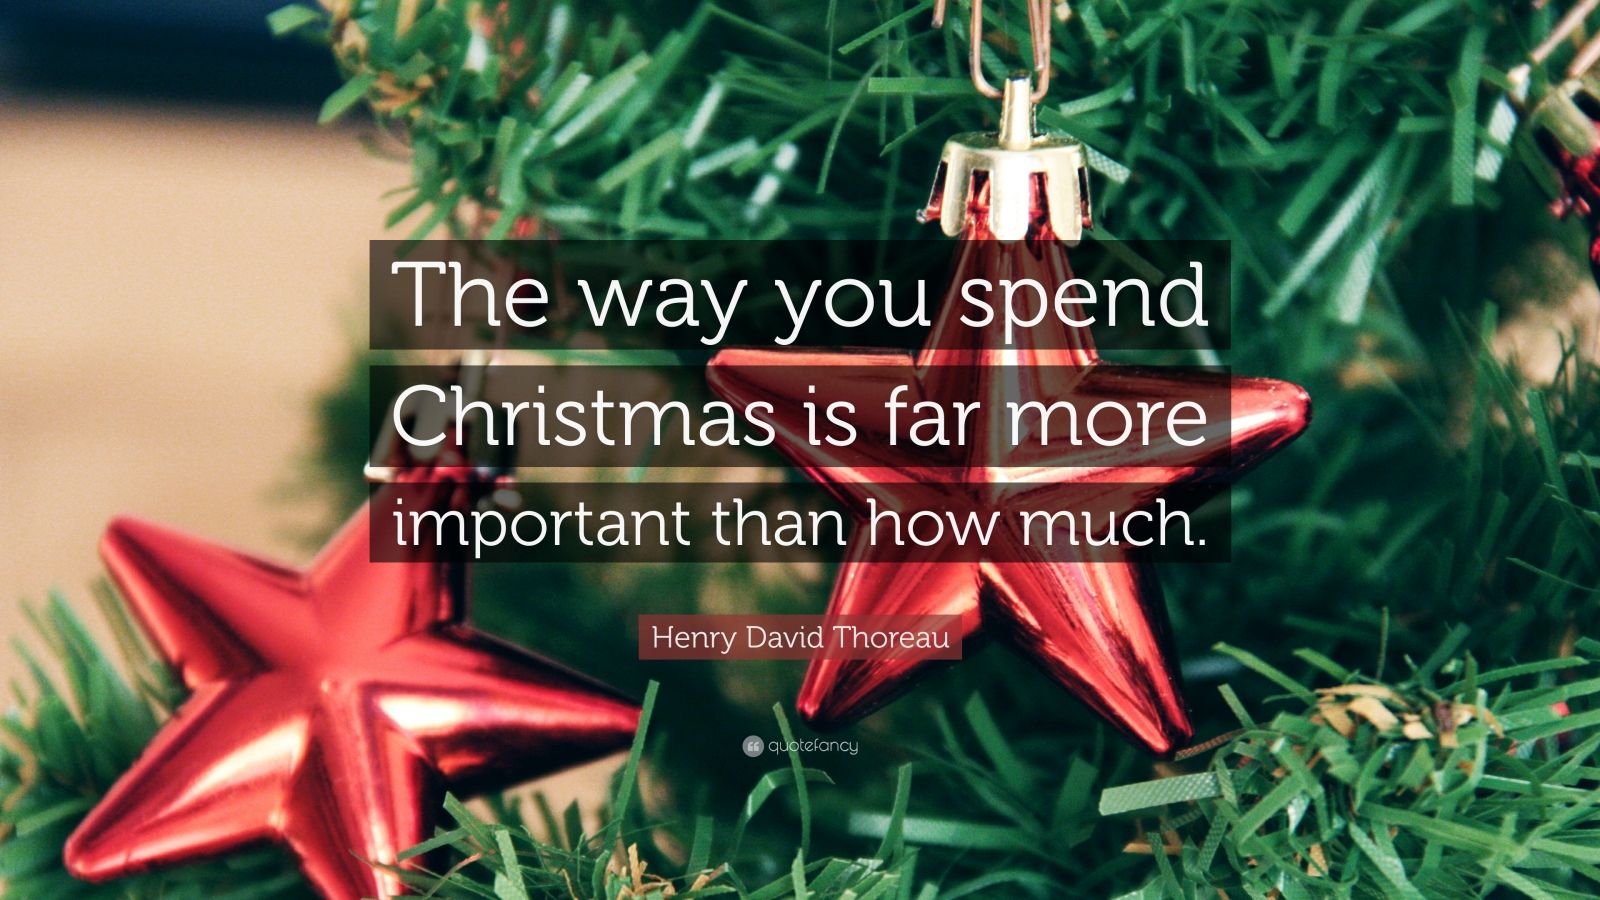 Henry David Thoreau Quote: “The way you spend Christmas is far more